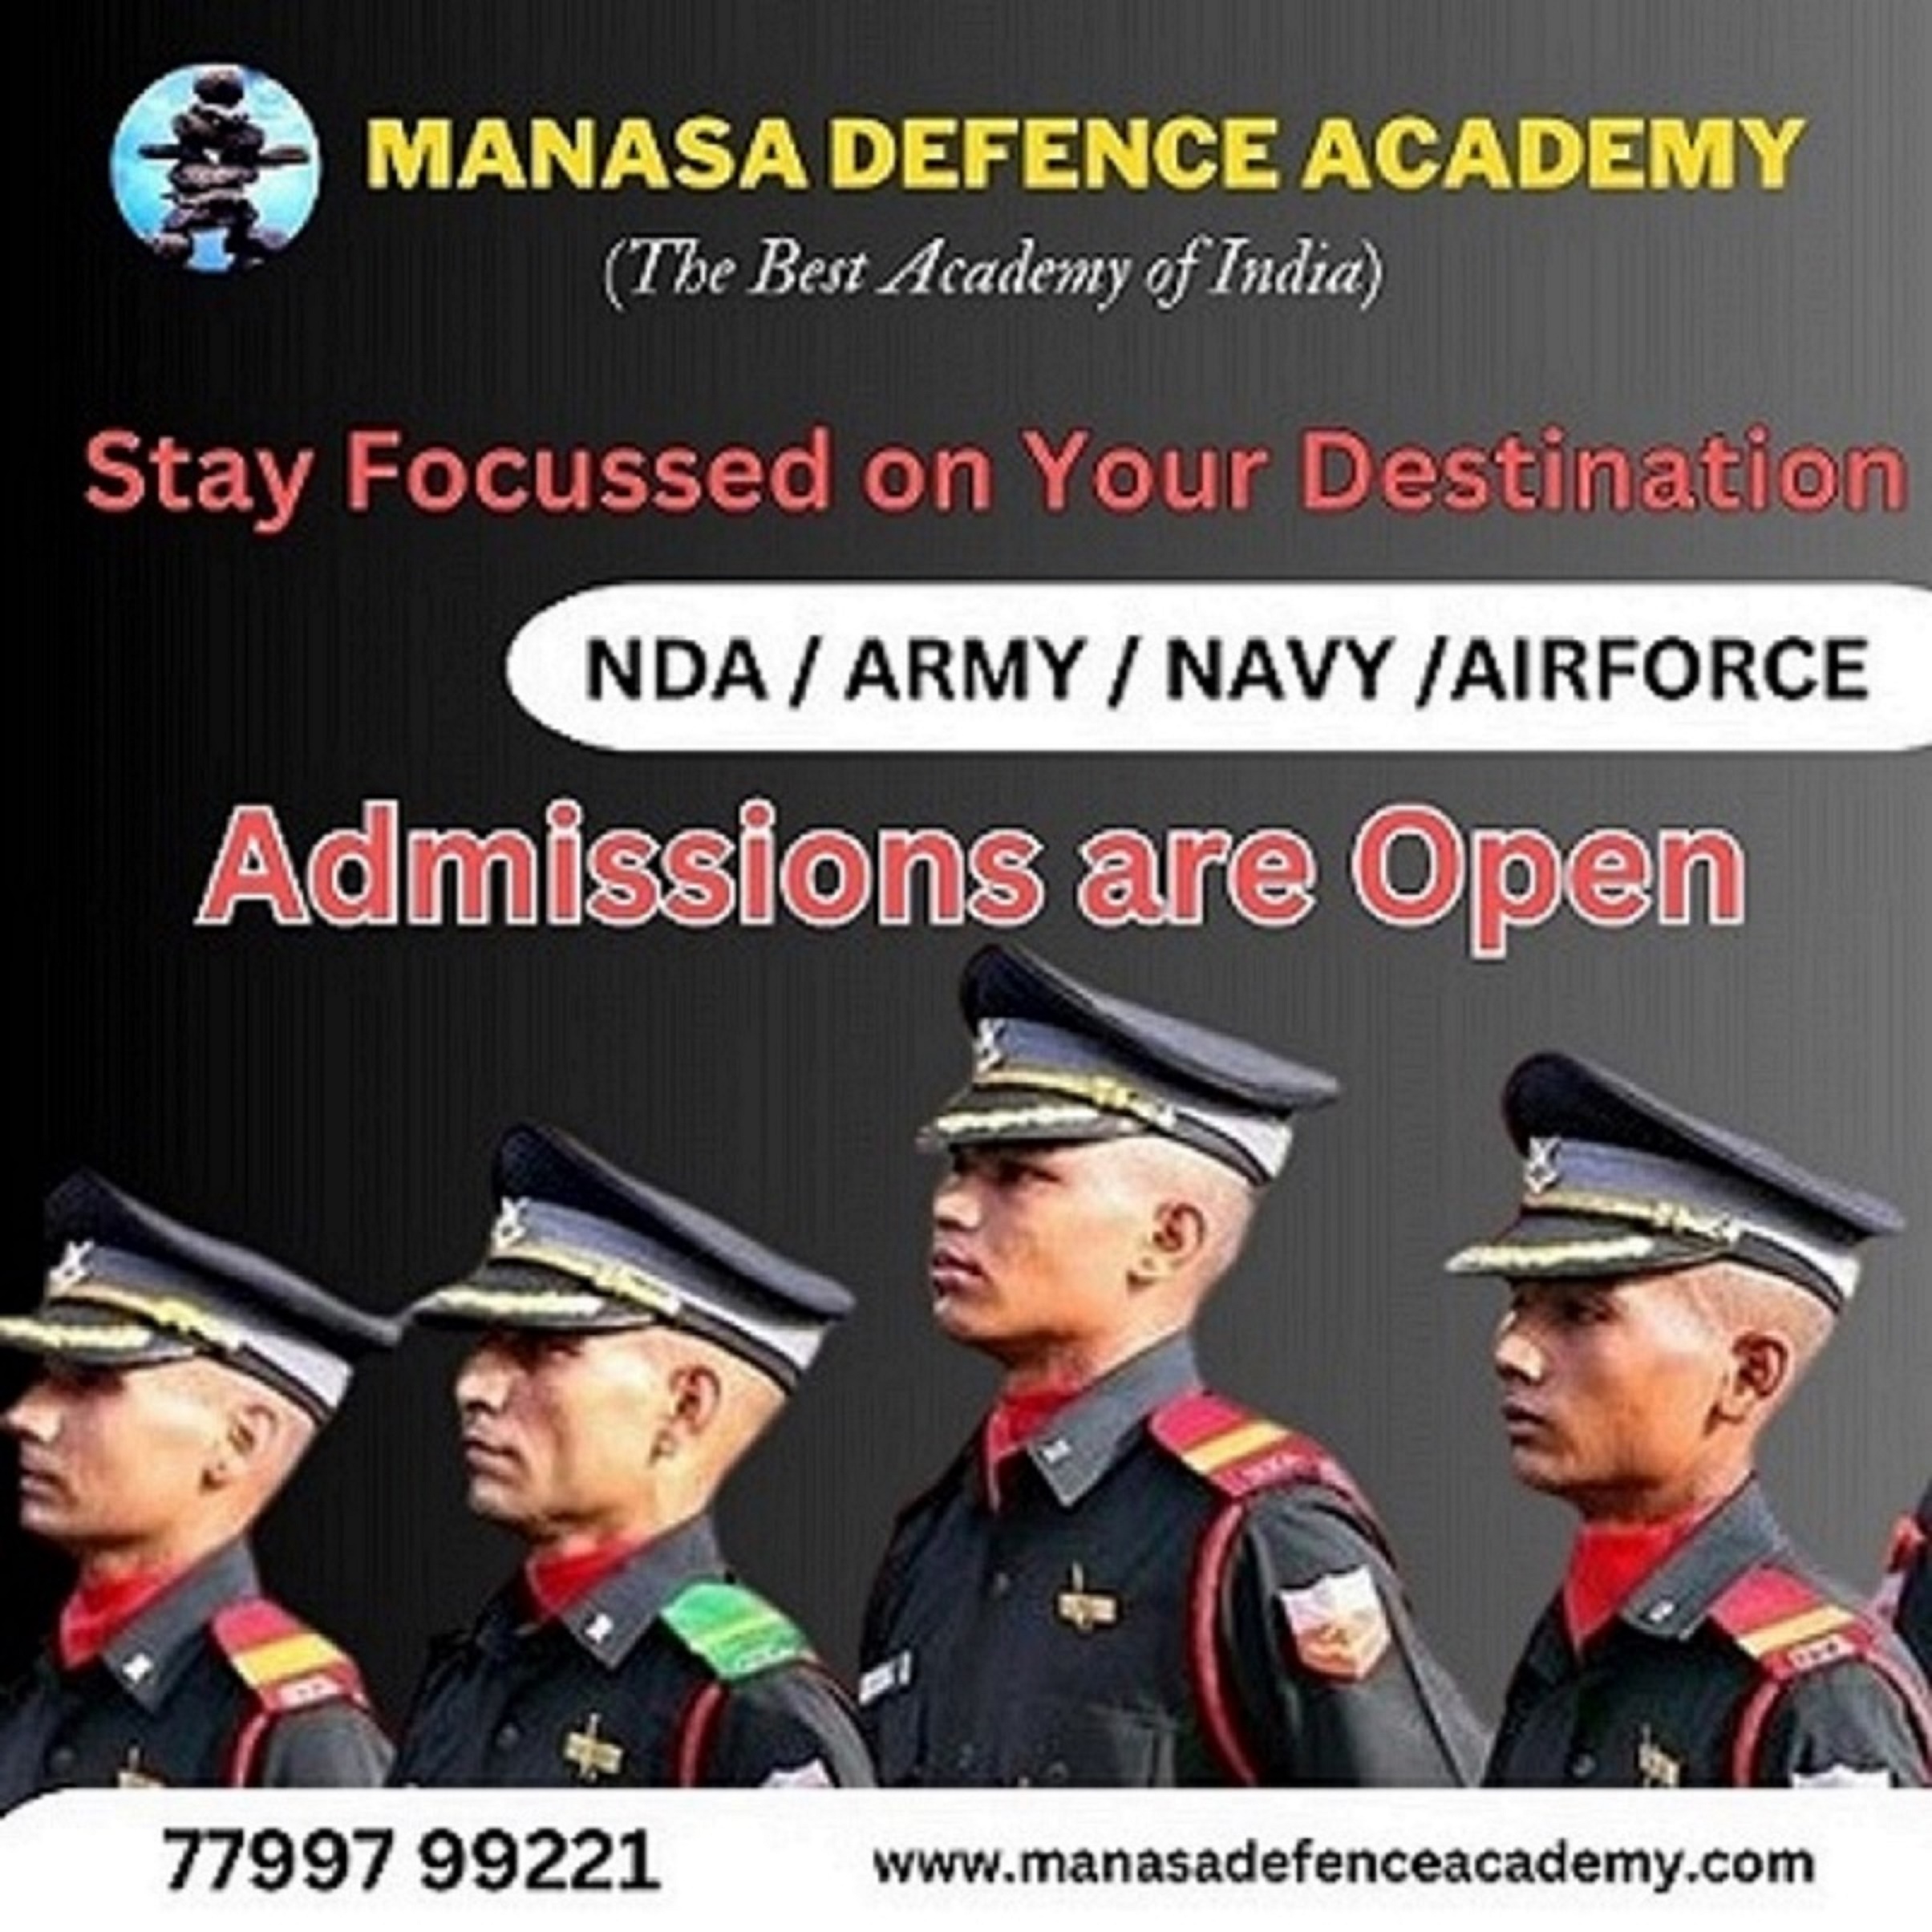 S- TN TNT Sa e003 hs
(The Best Academy of India)

Stay Focussed on Your Destinaticn

NDA / ARMY / NAVY JAIRFORCE

Admissions are Open

 

77997 99221 www.manasadefenceacademy.com